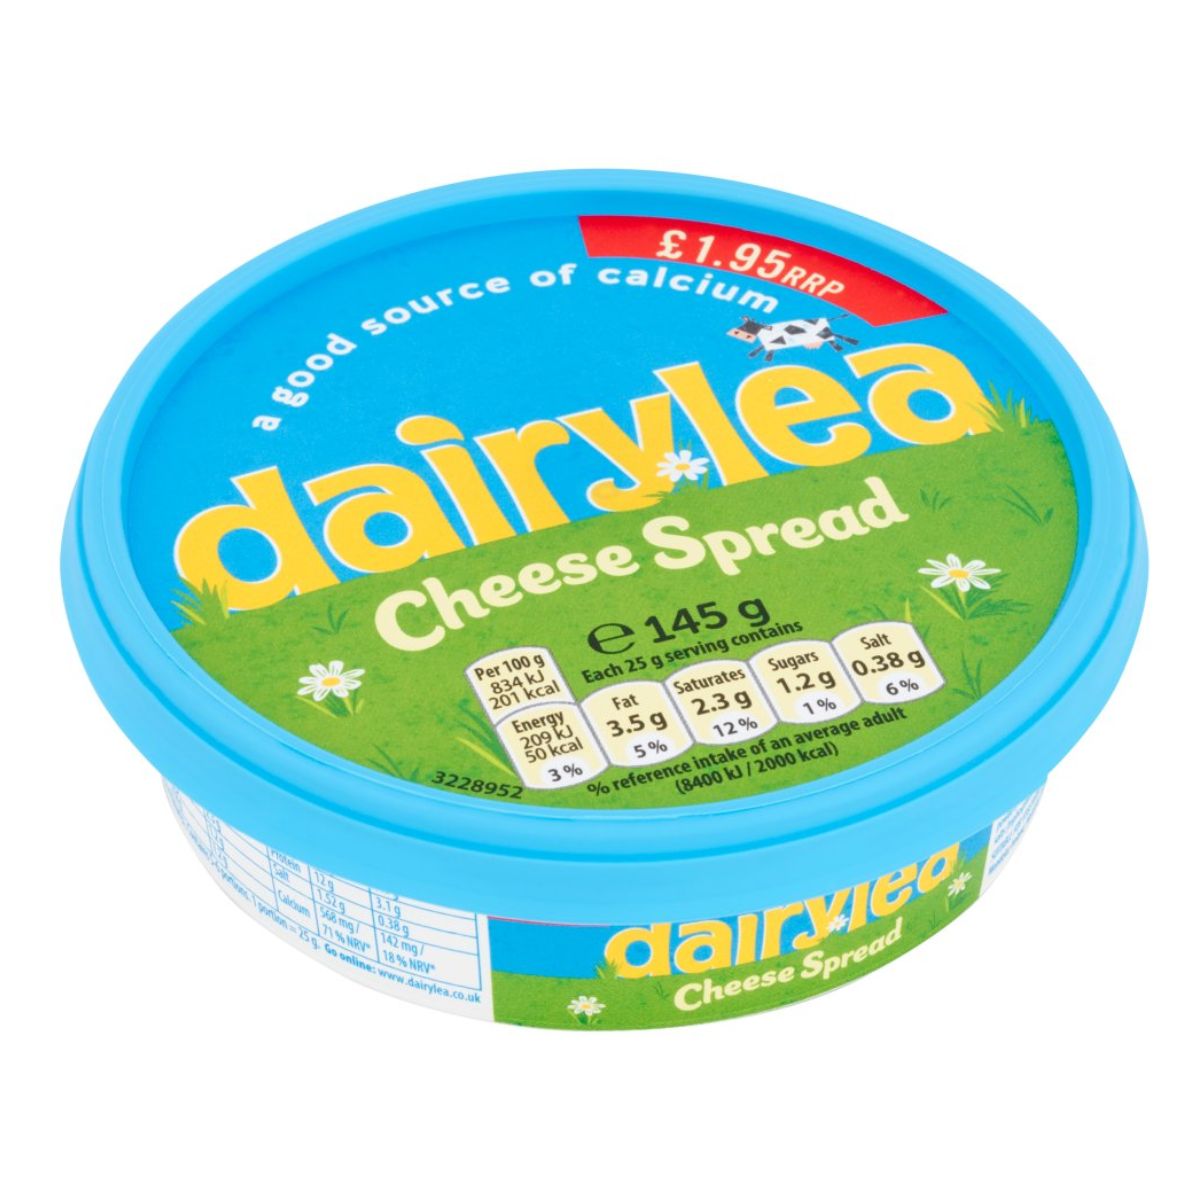 A blue container with green and yellow text, Dairylea - Cheese Spread - 145g.